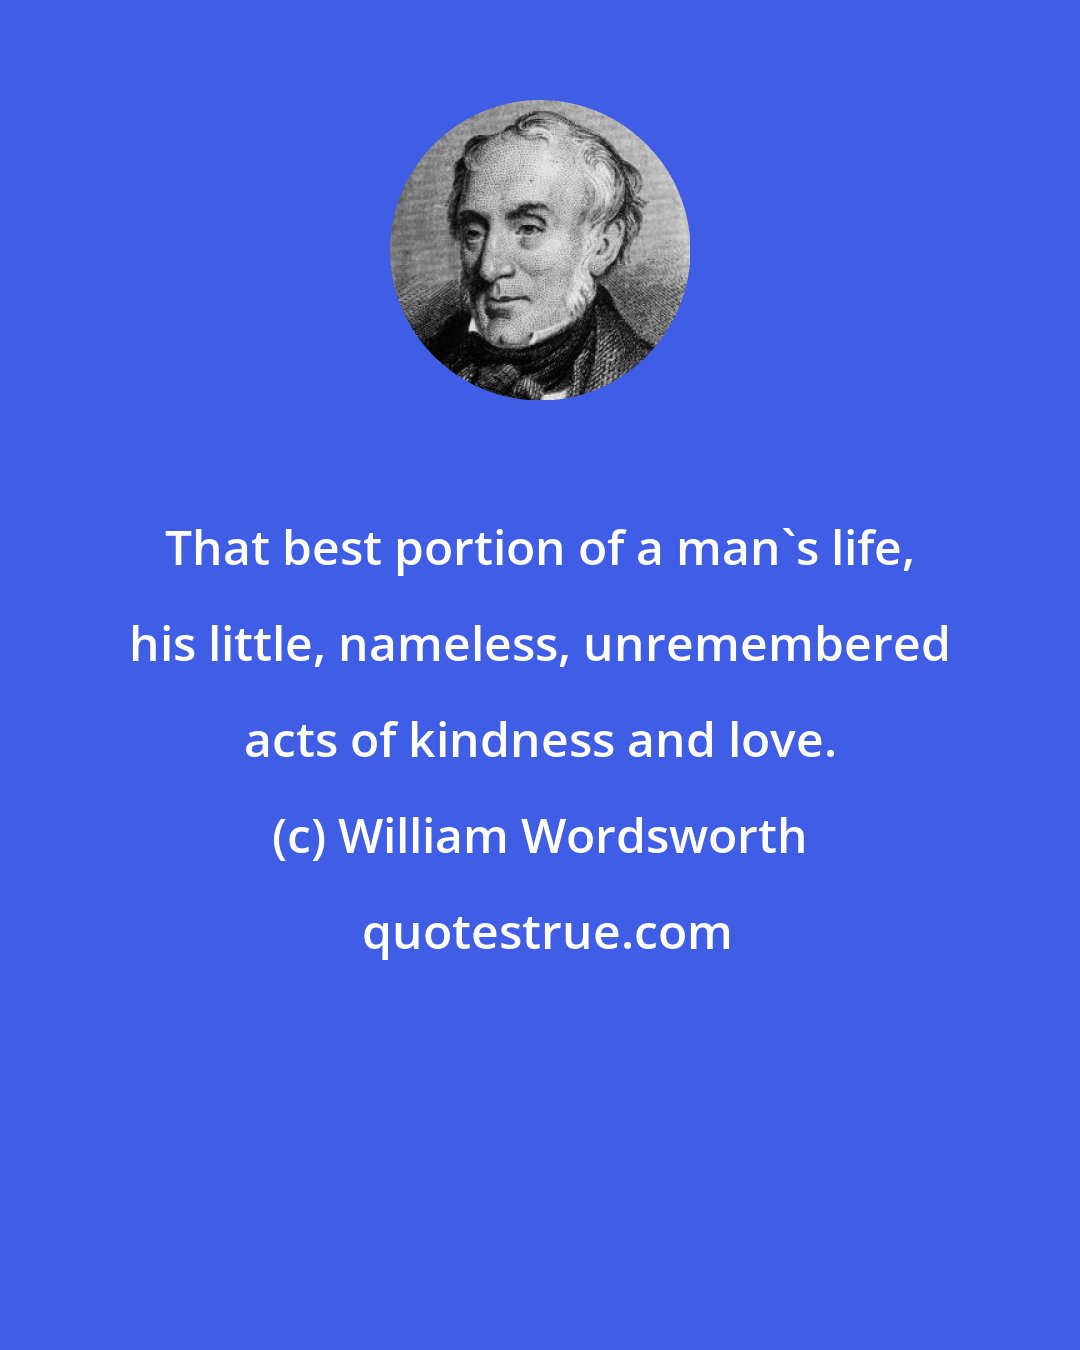 William Wordsworth: That best portion of a man's life, his little, nameless, unremembered acts of kindness and love.